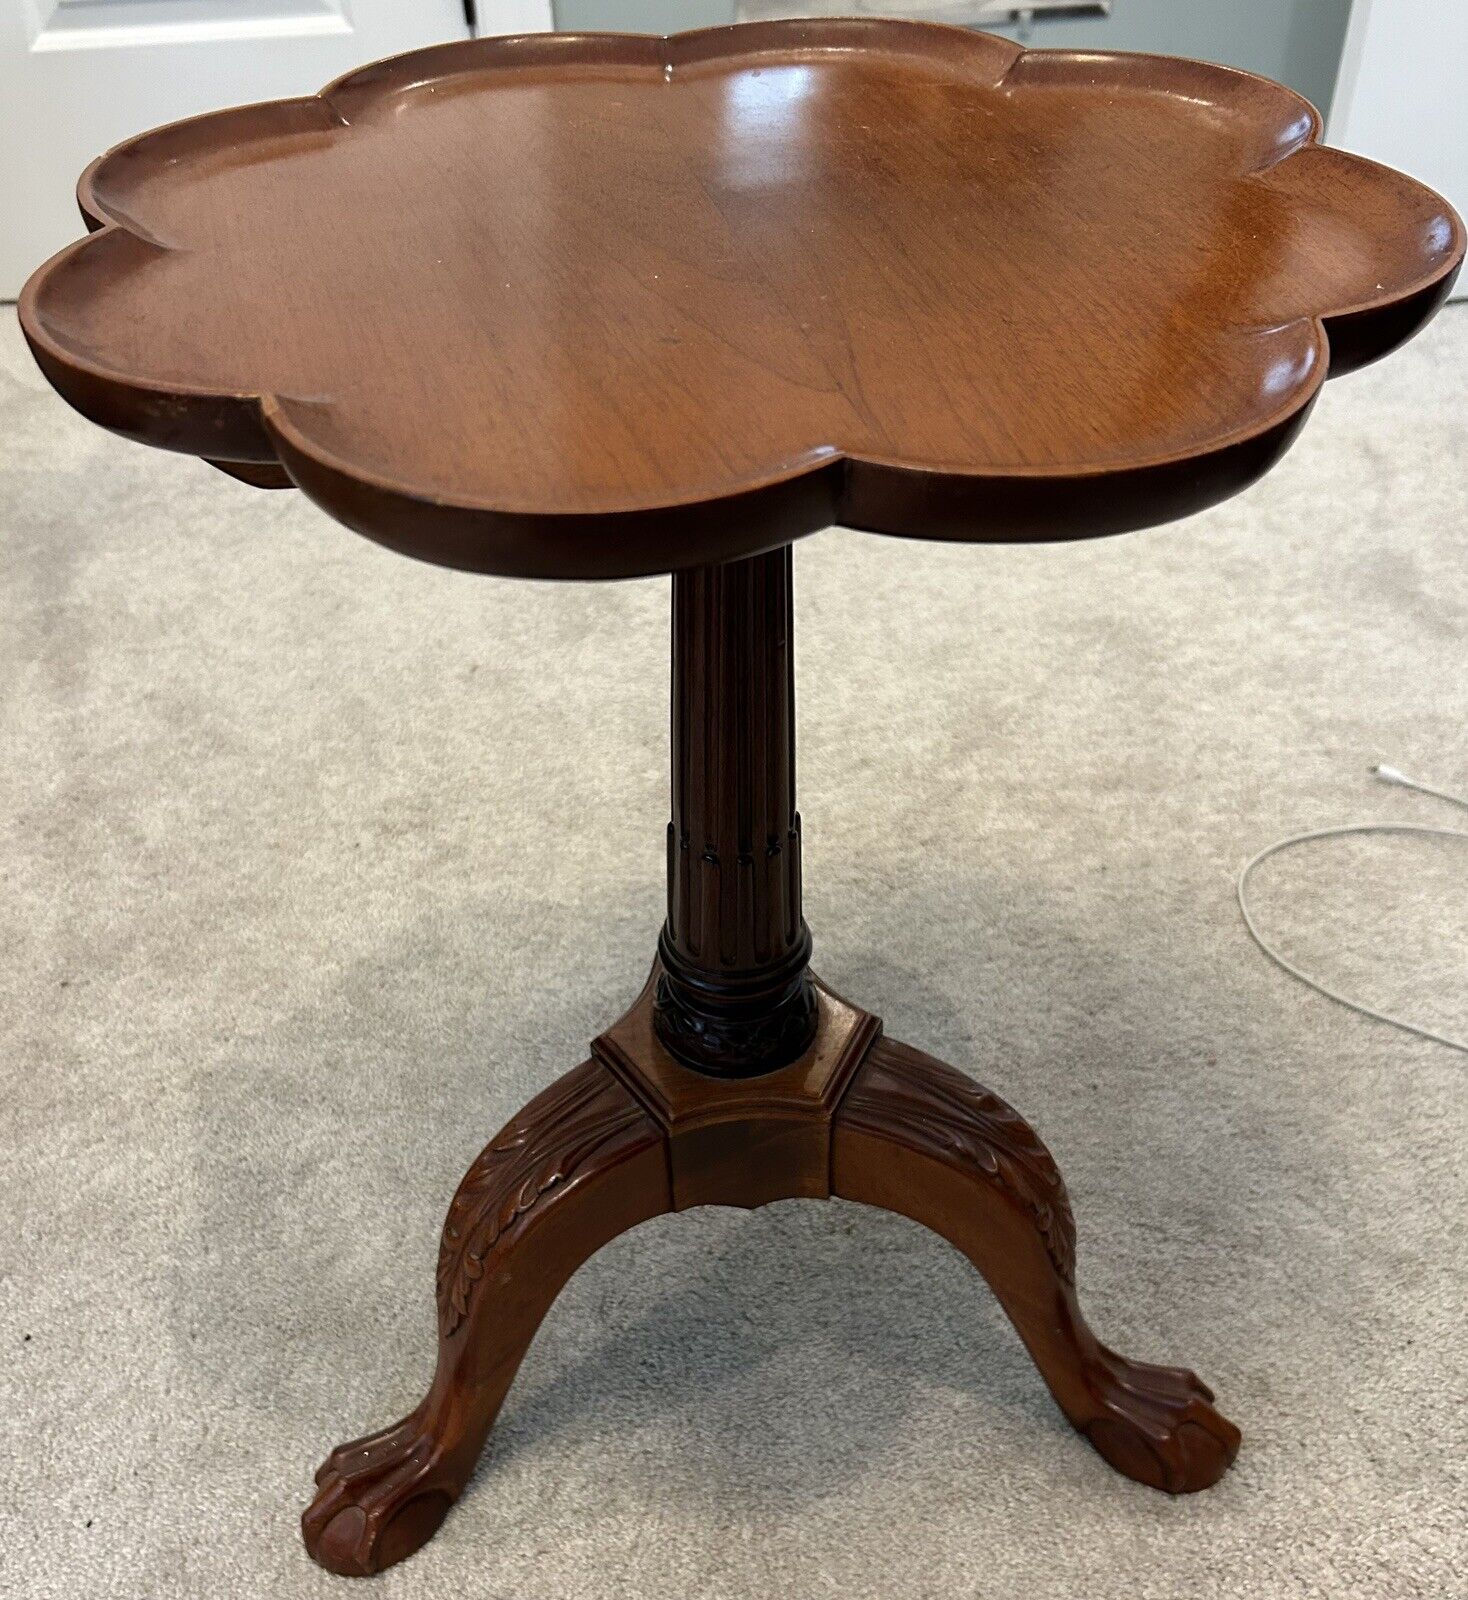 Antique Pedestal Wood Stand/Accent Table - Mahogany - Rare